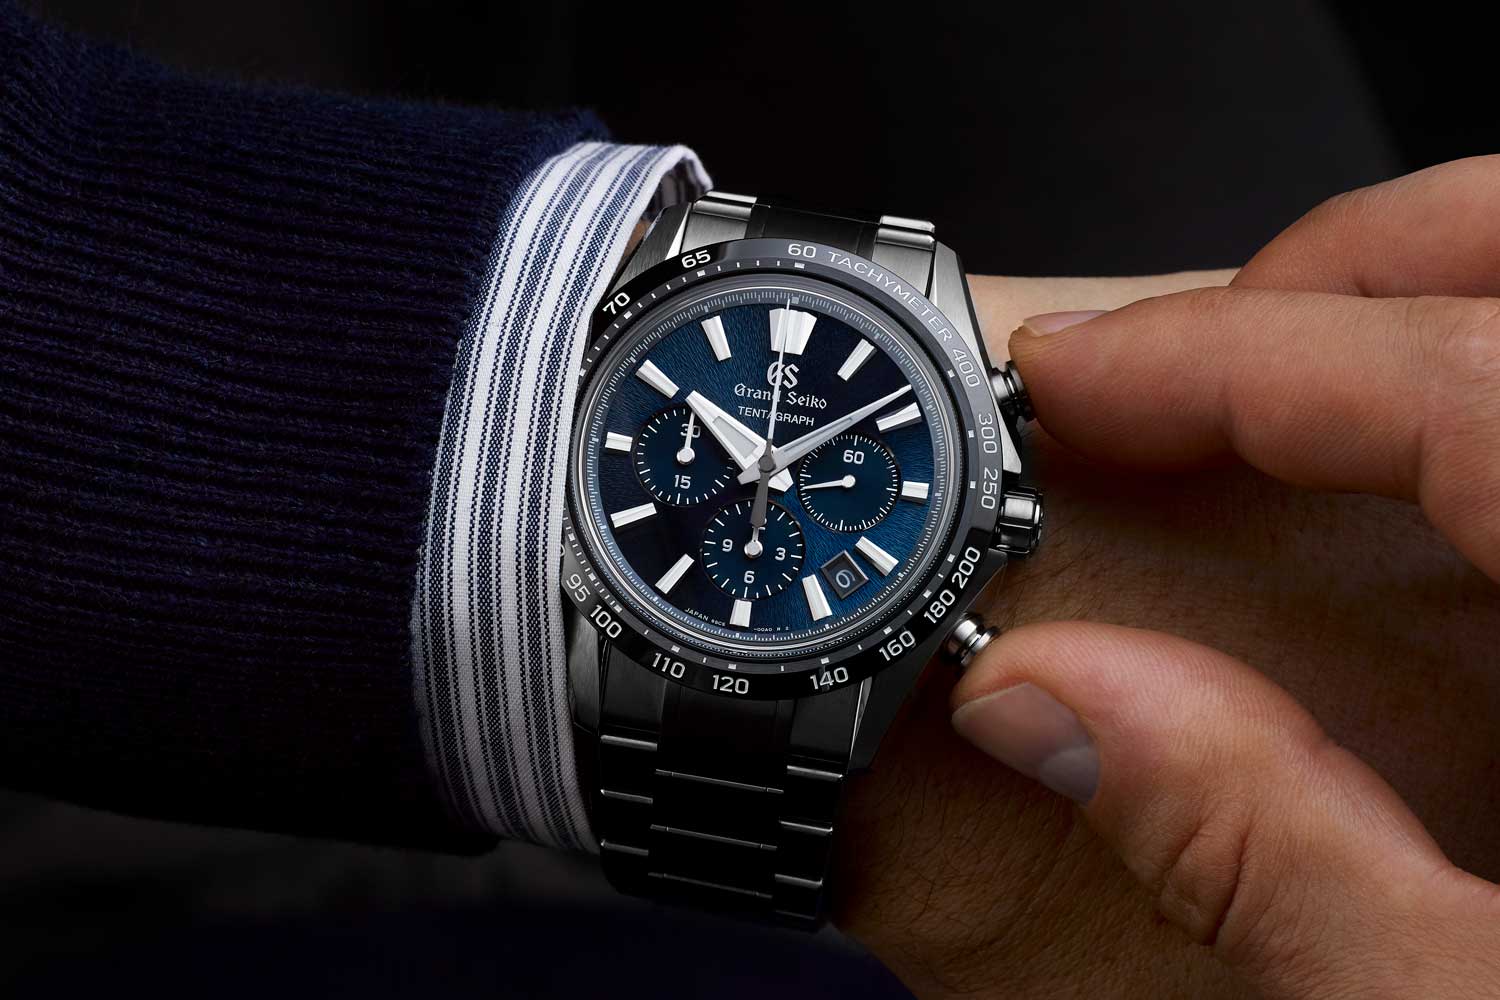 Introducing the Grand Seiko SLGC001 Tentagraph, SBGD213 and - Revolution